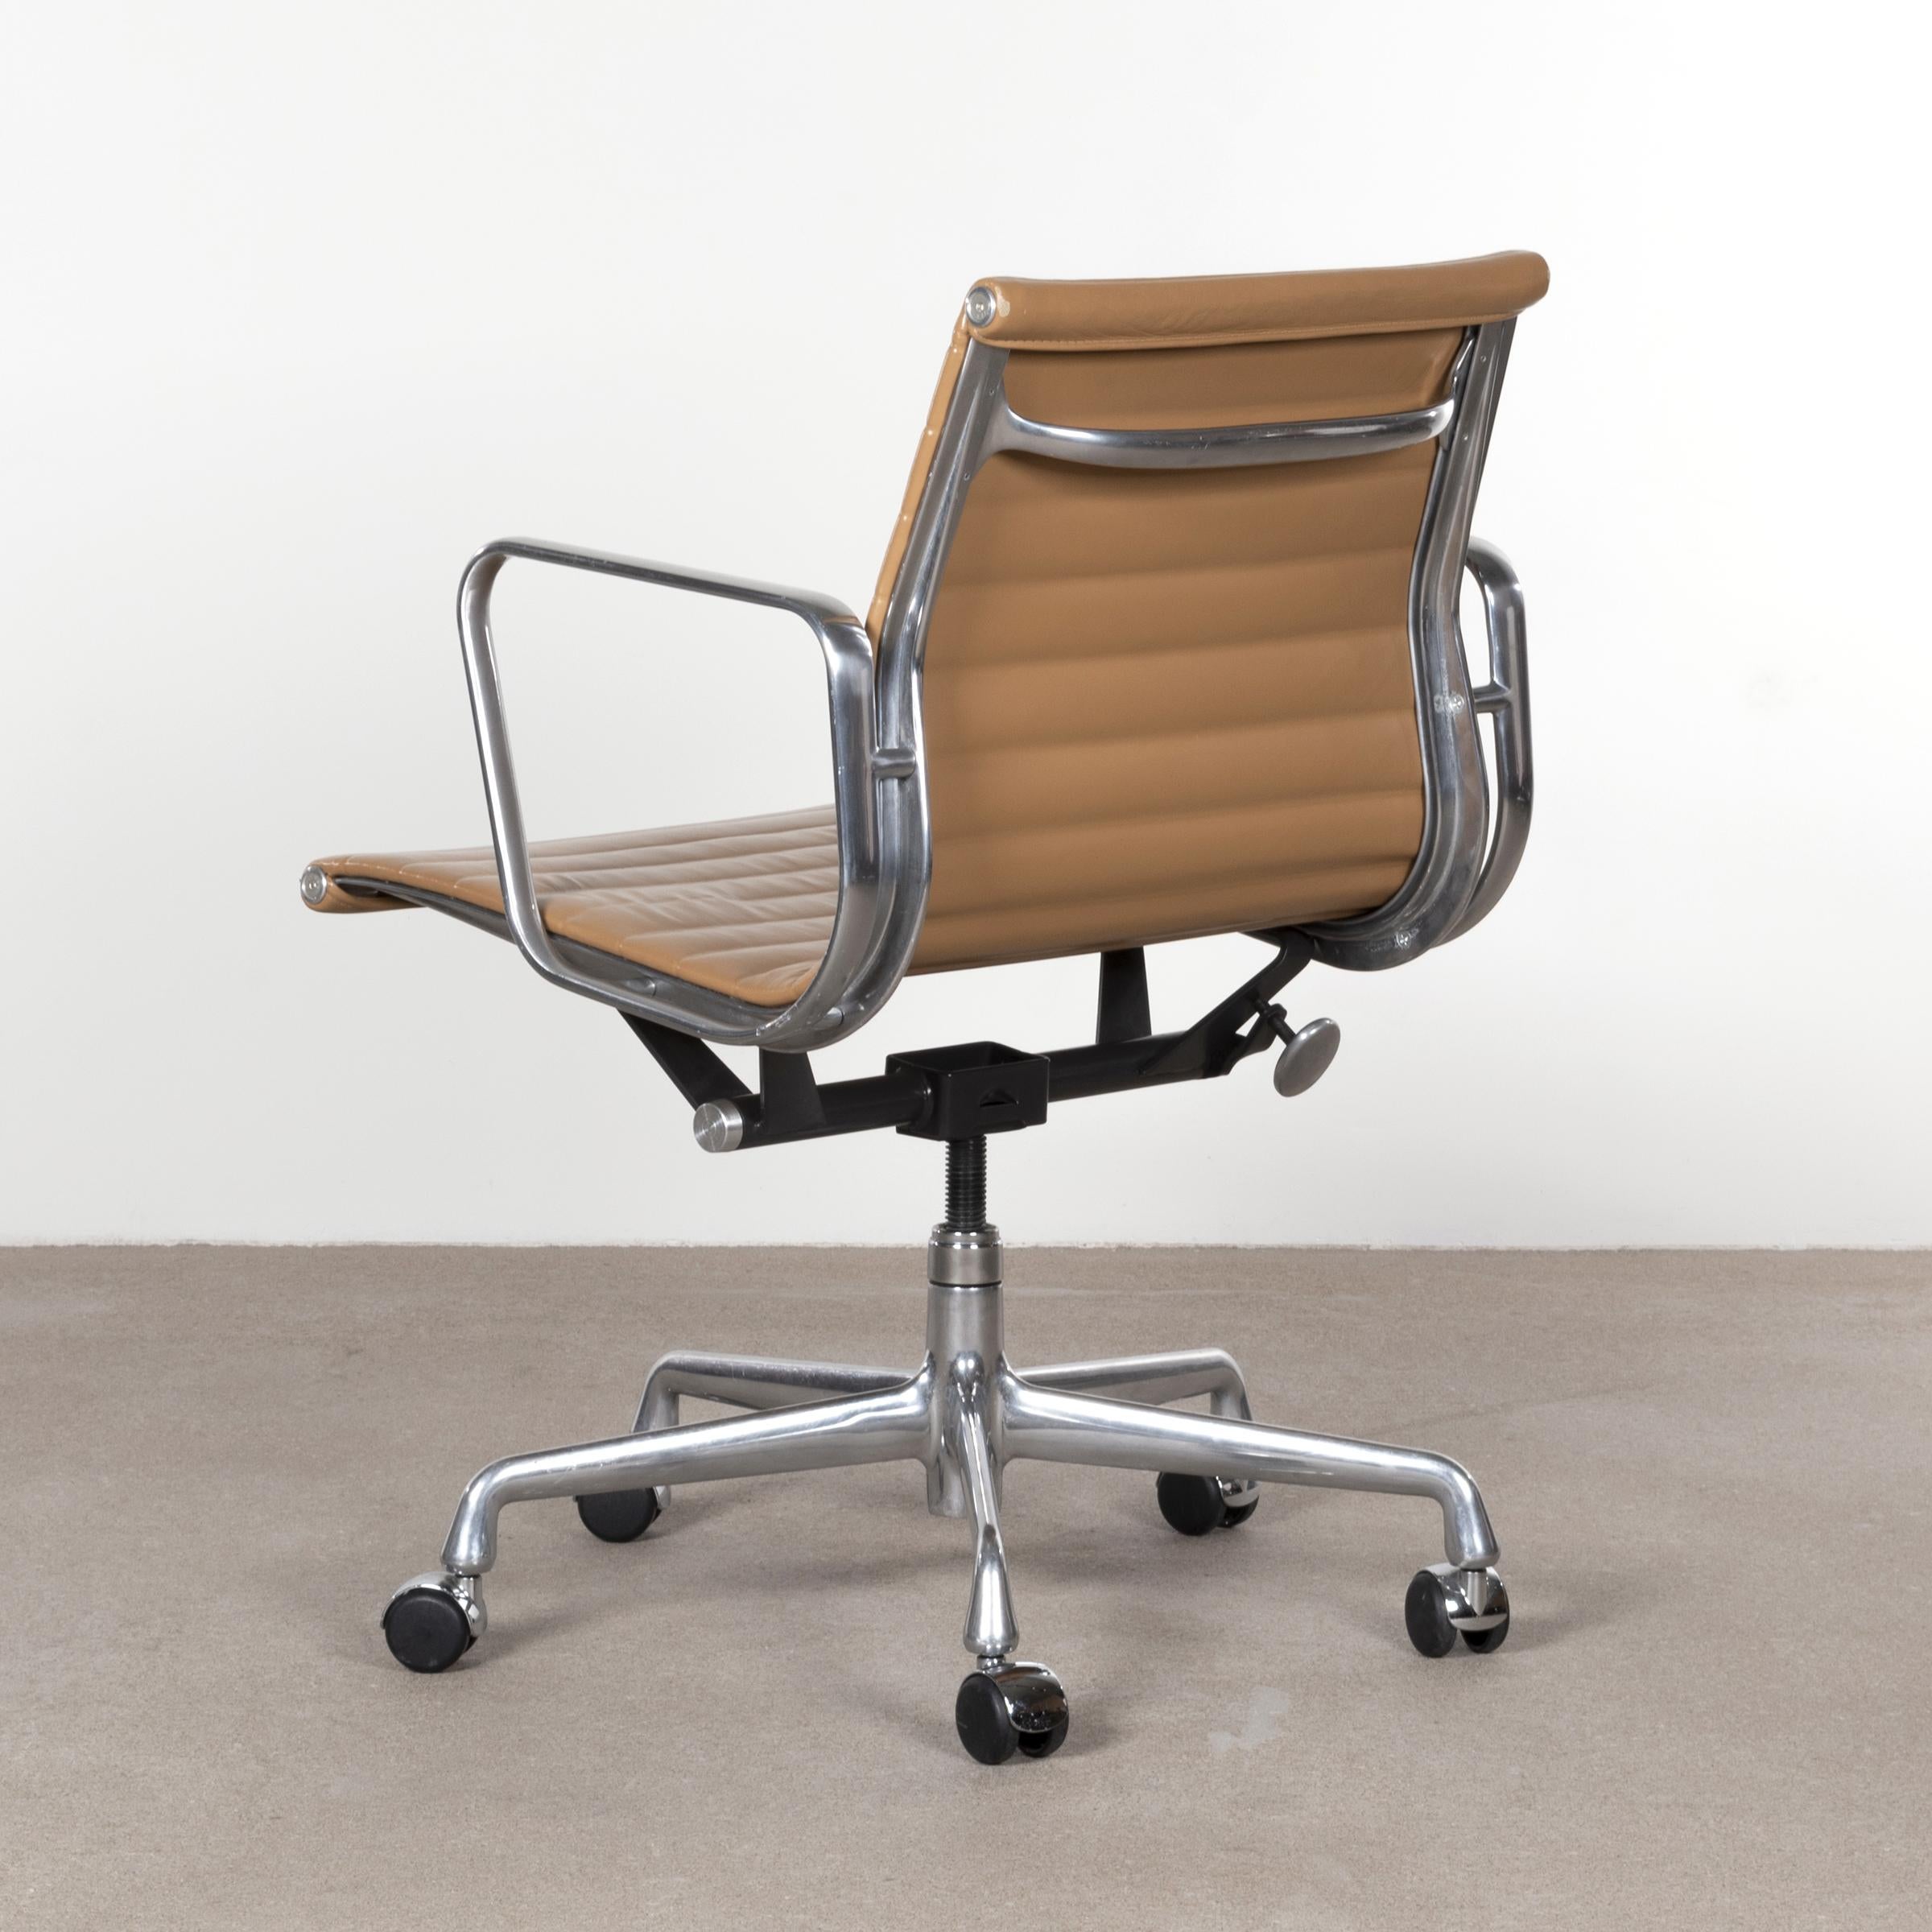 American Multiple Eames Management Office Chair in Cognac Leather for Herman Miller